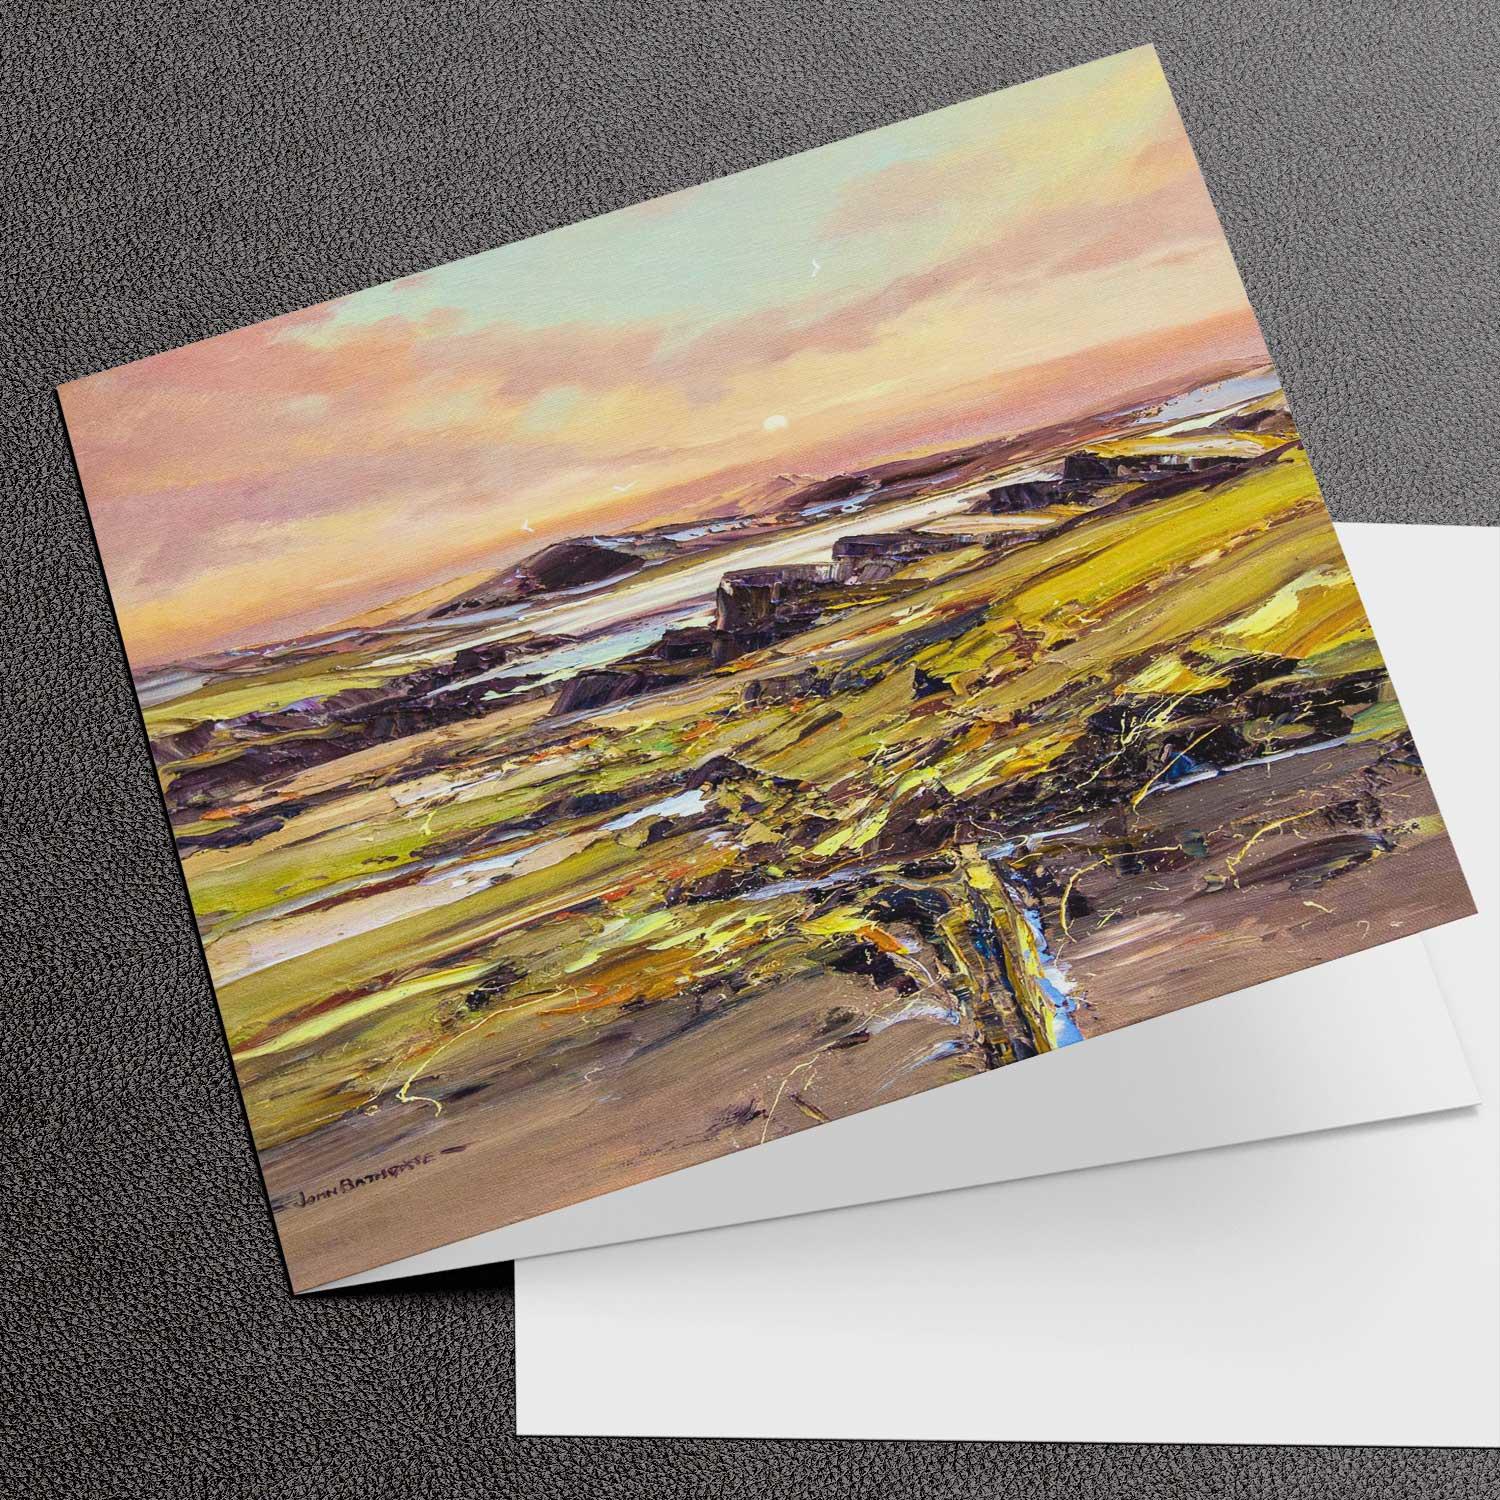 Low Sun, Lewis Greeting Card from an original painting by artist John Bathgate